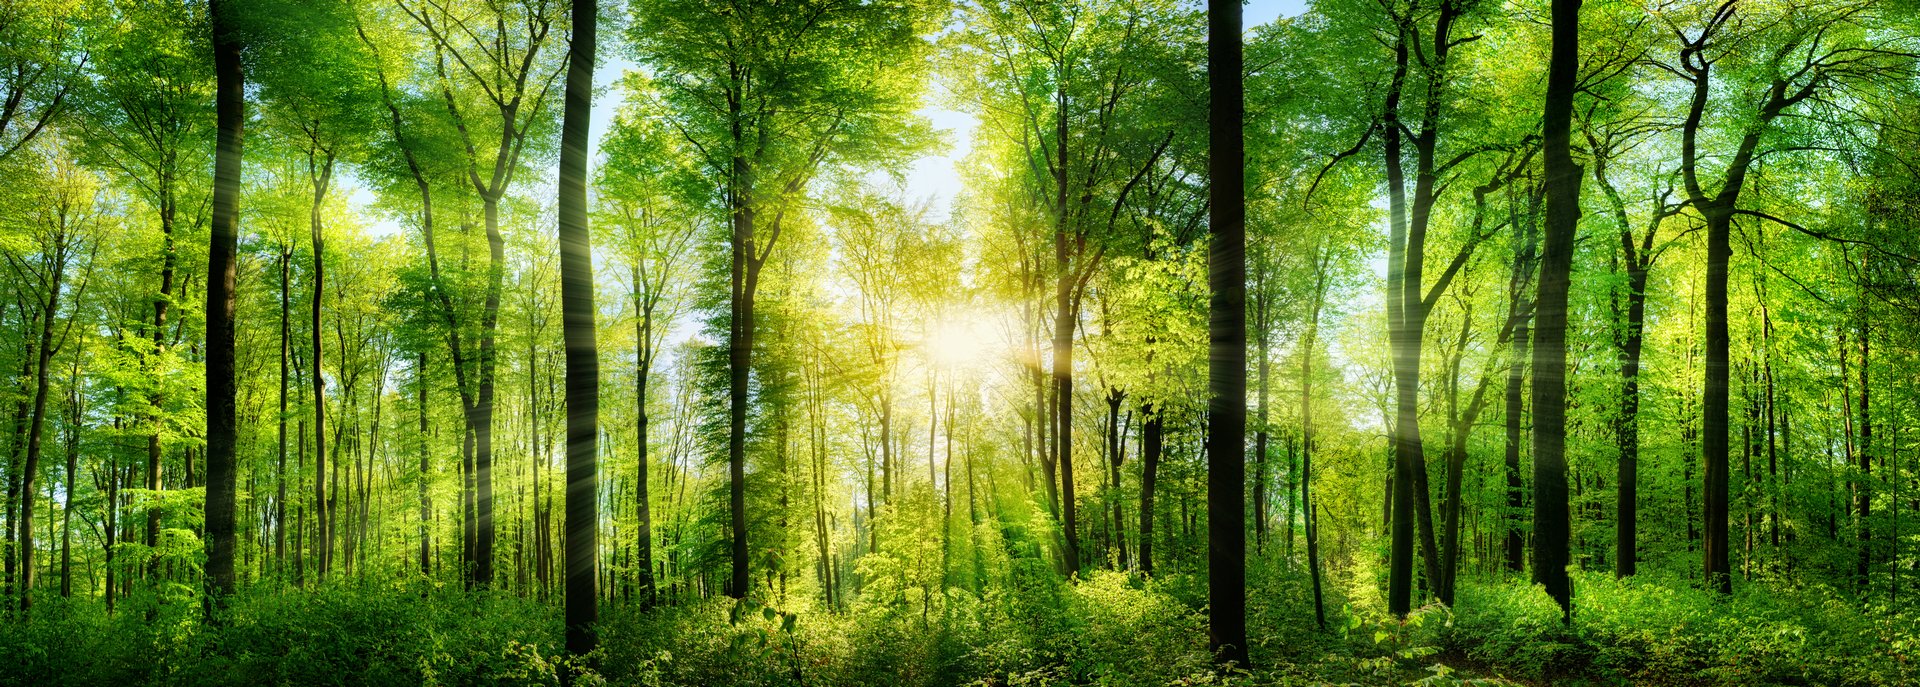 Green forest of trees photograph.